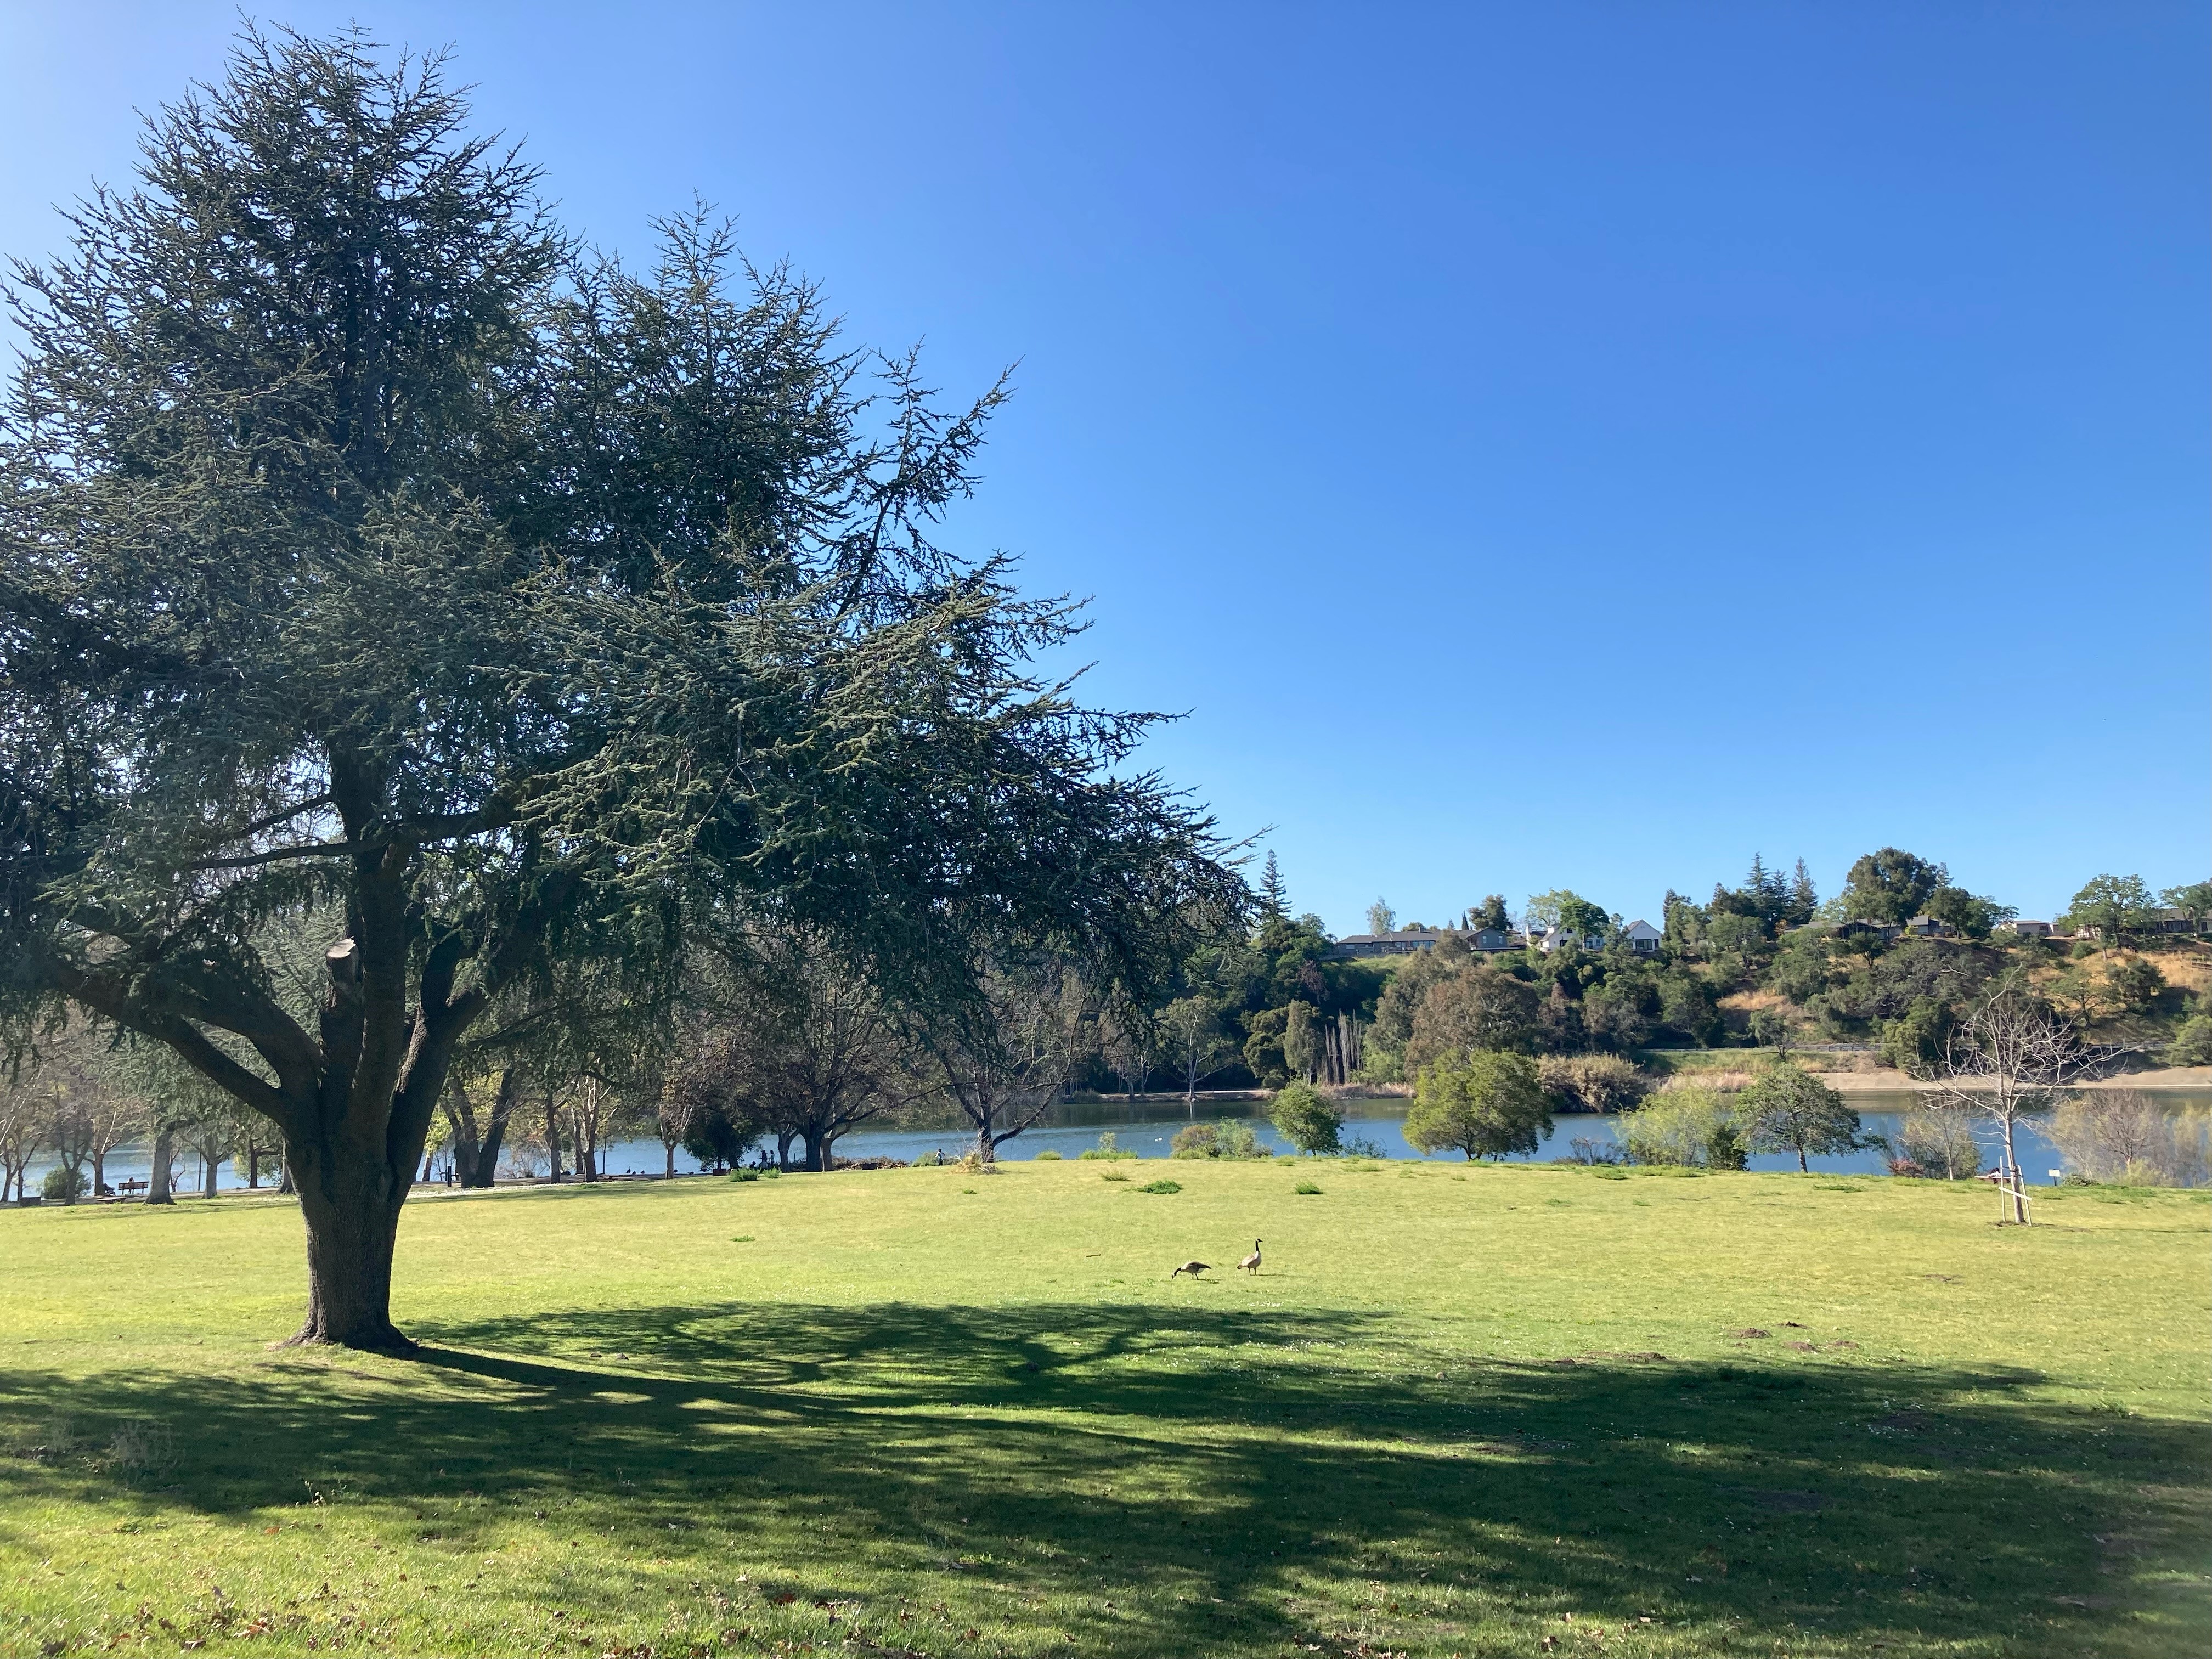 A landscape photo of Vasona Lake with a large tree on the left and grassy field with lake in the background